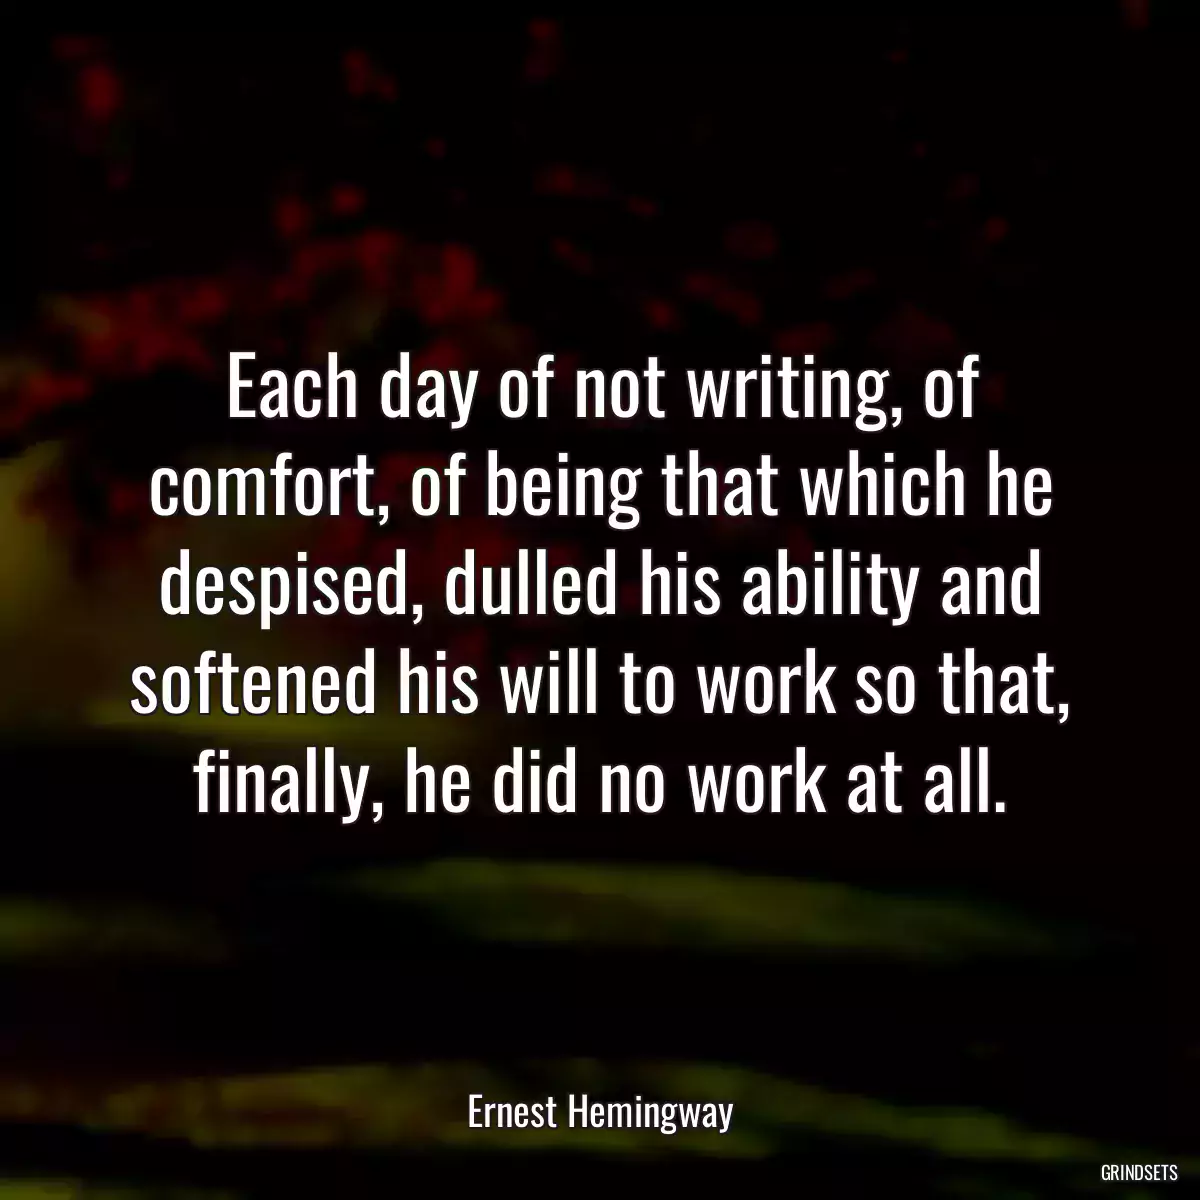 Each day of not writing, of comfort, of being that which he despised, dulled his ability and softened his will to work so that, finally, he did no work at all.